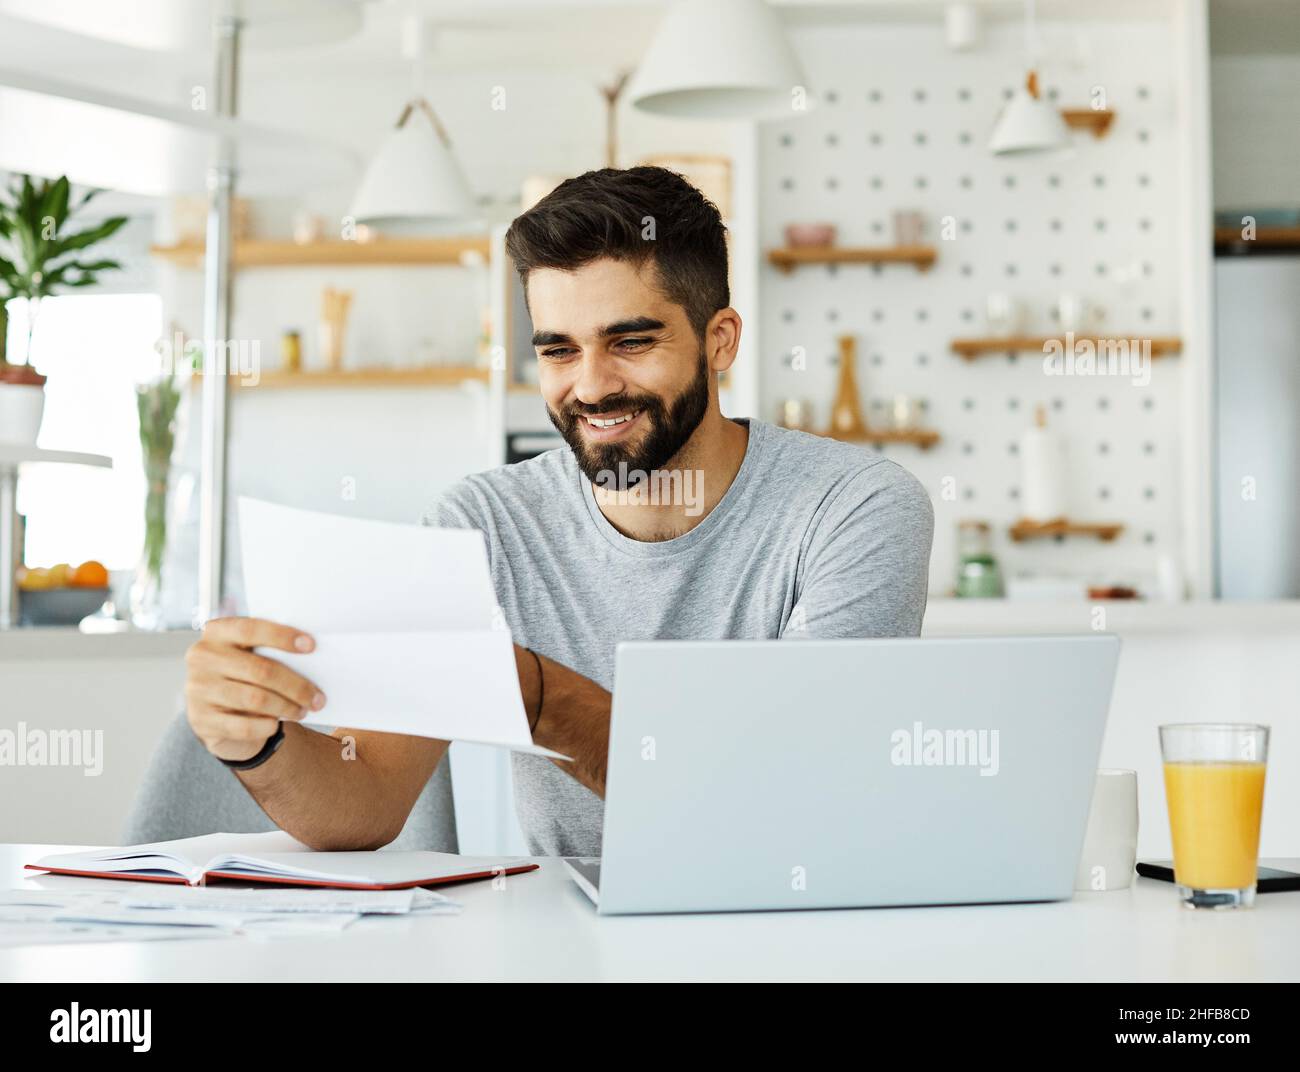 laptop man computer home technology young student business internet study document paperwork reading Stock Photo